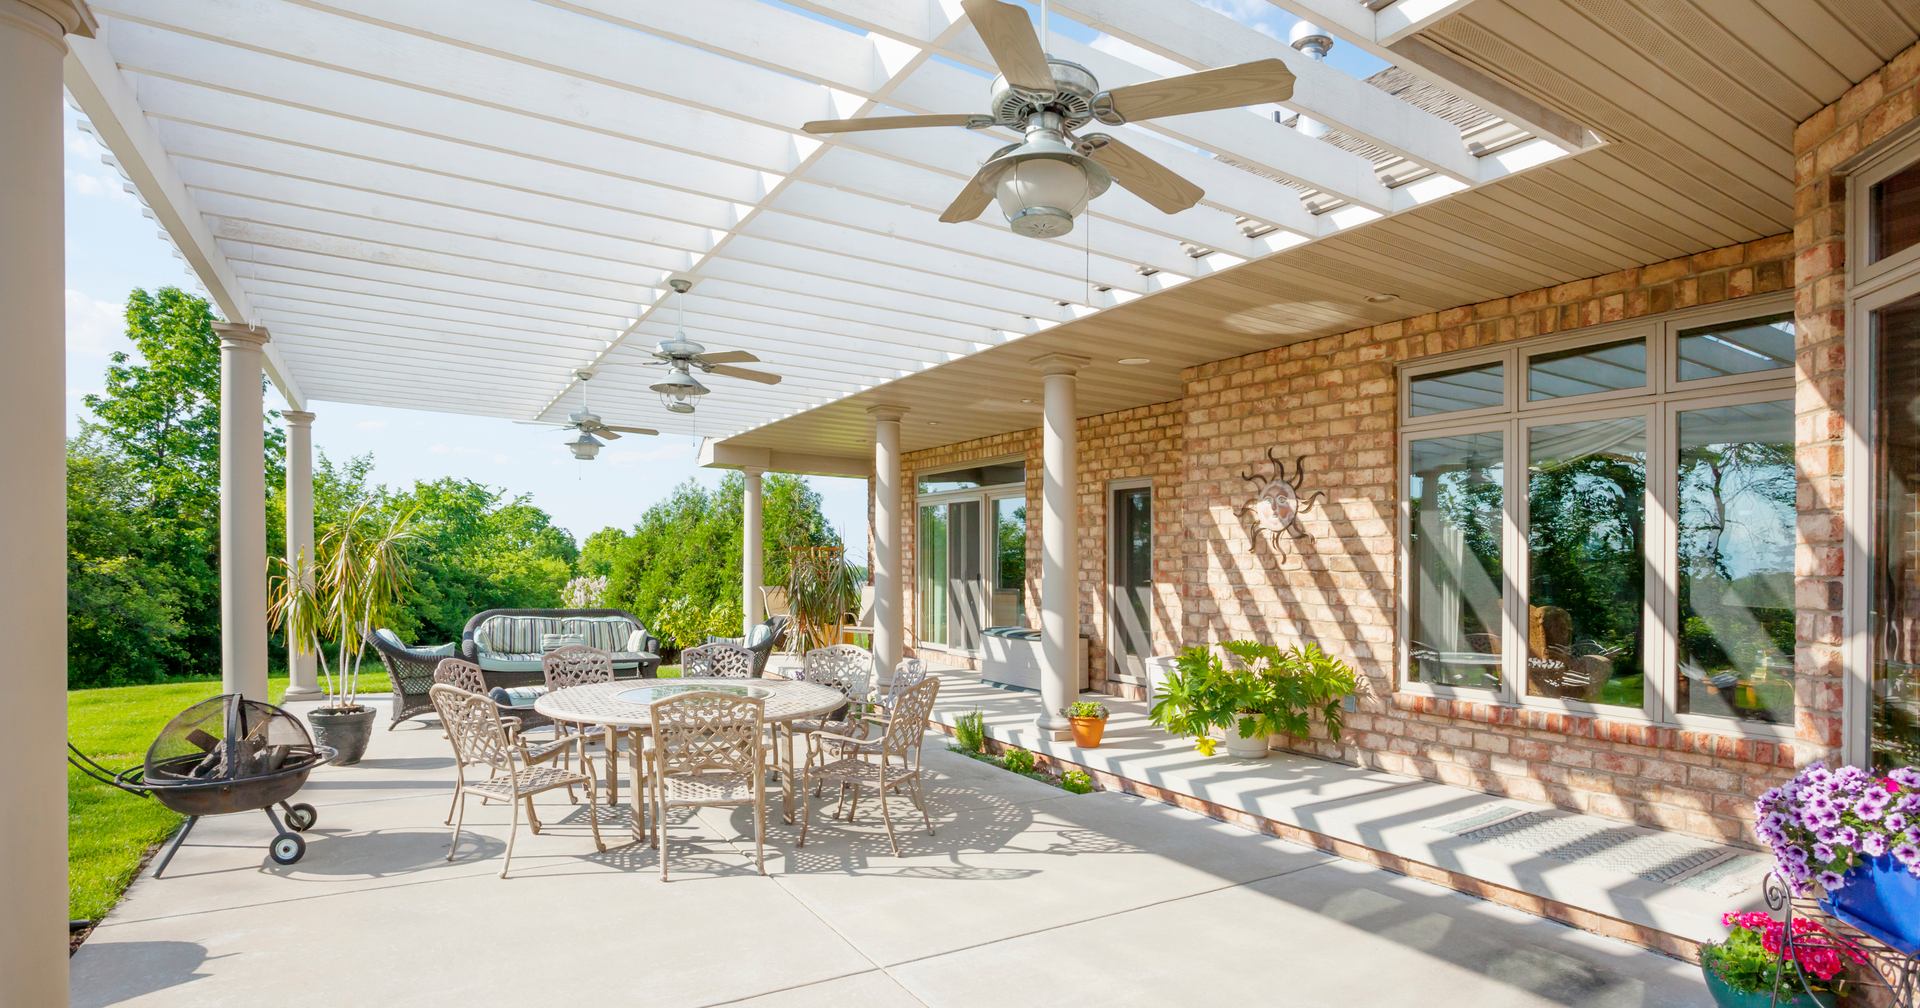 Where Style Meets Shade: Tony Giesel Construction's Pergola Expertise